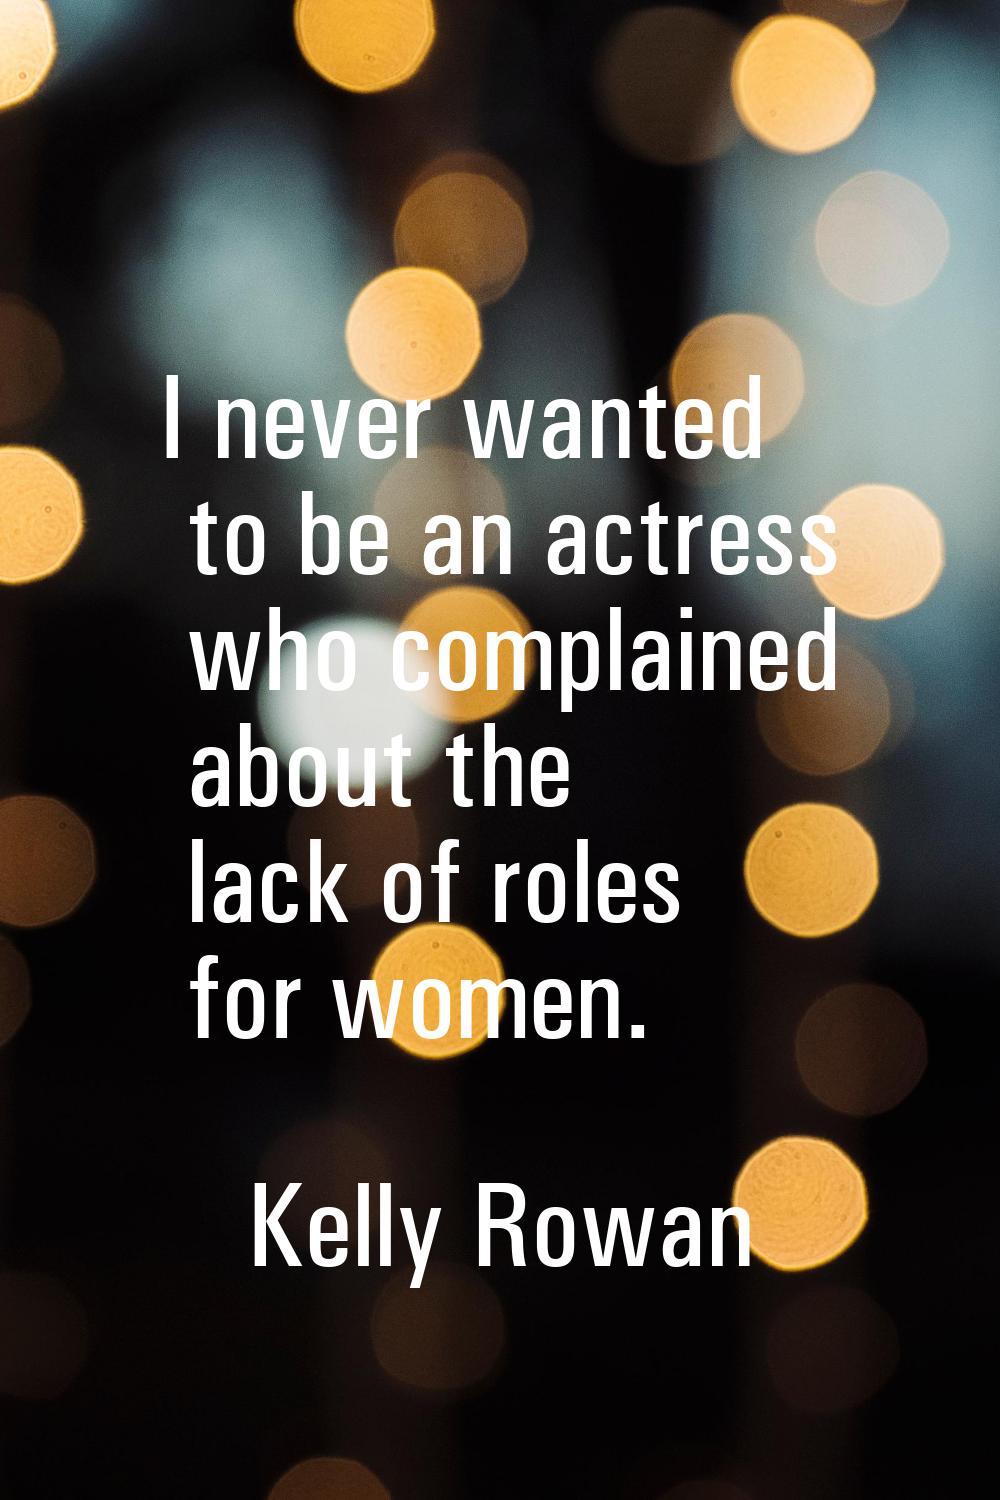 I never wanted to be an actress who complained about the lack of roles for women.